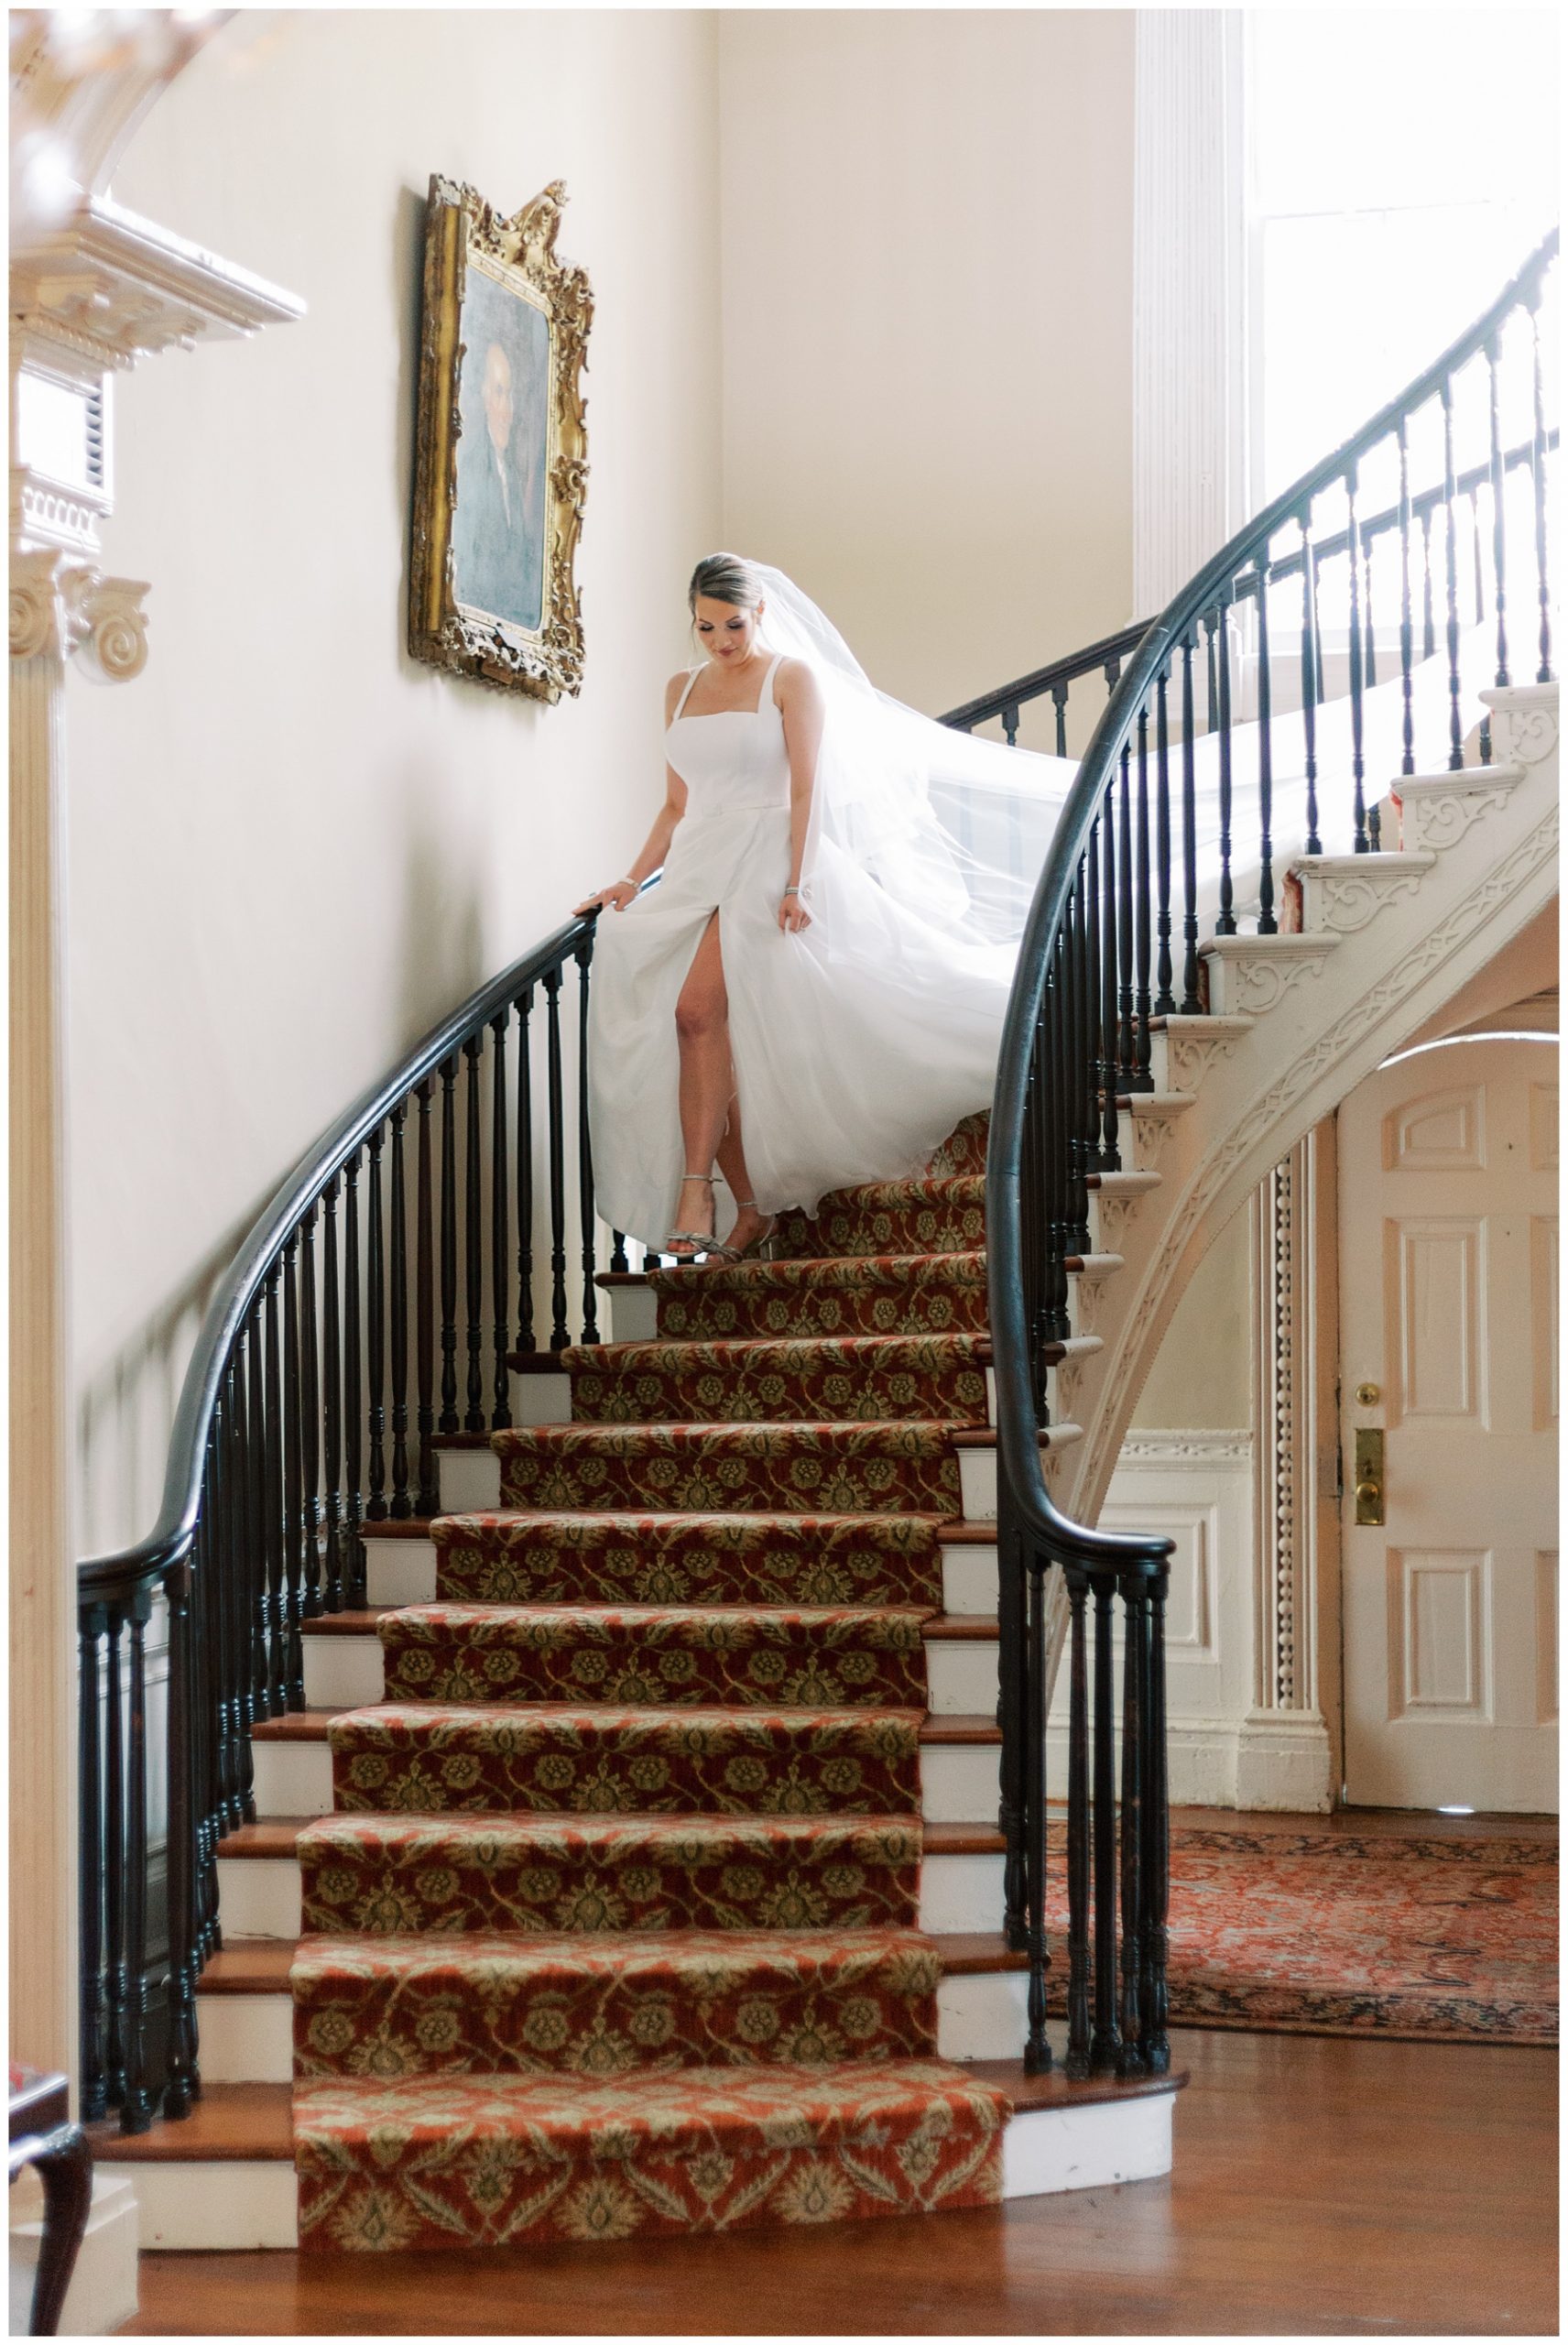 bride walks down staircase at the Governor Thomas Bennett House showing off slit in wedding dress skirt